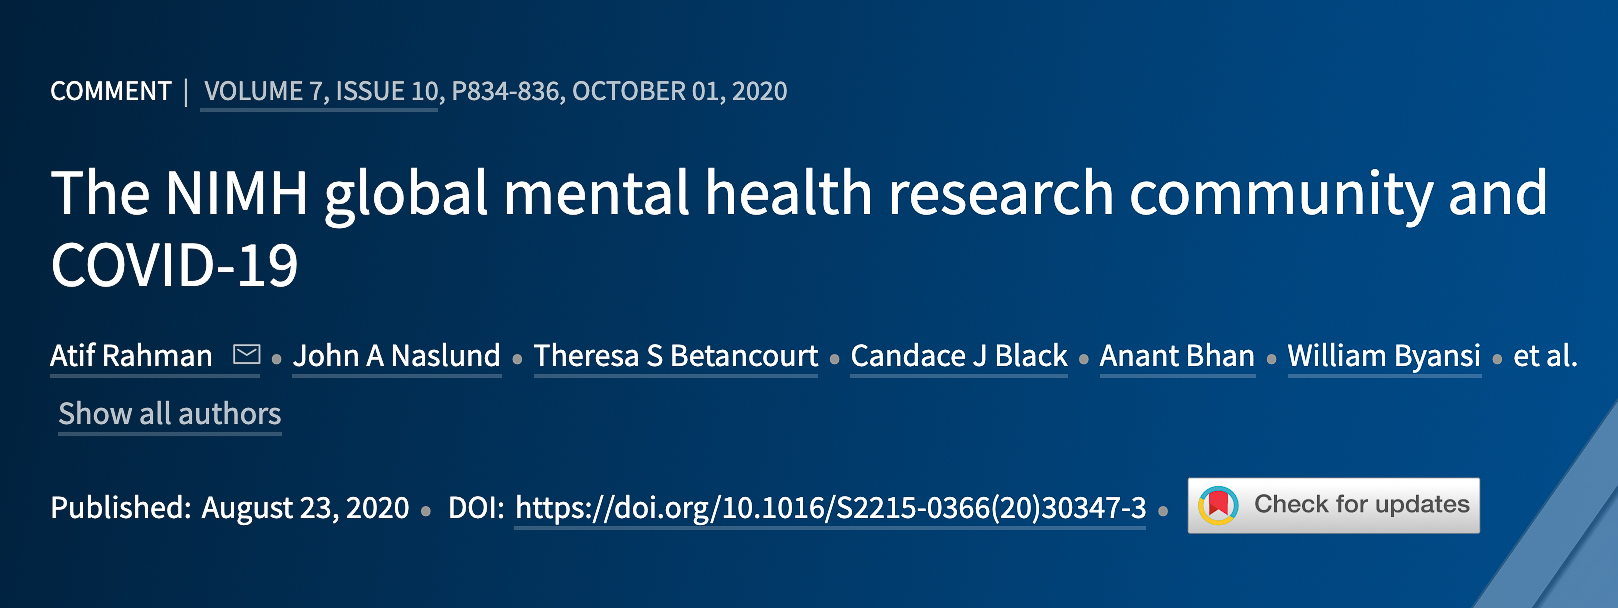 The-NIMH-Global-Mental-Health-Research-Community-and-COVID-19